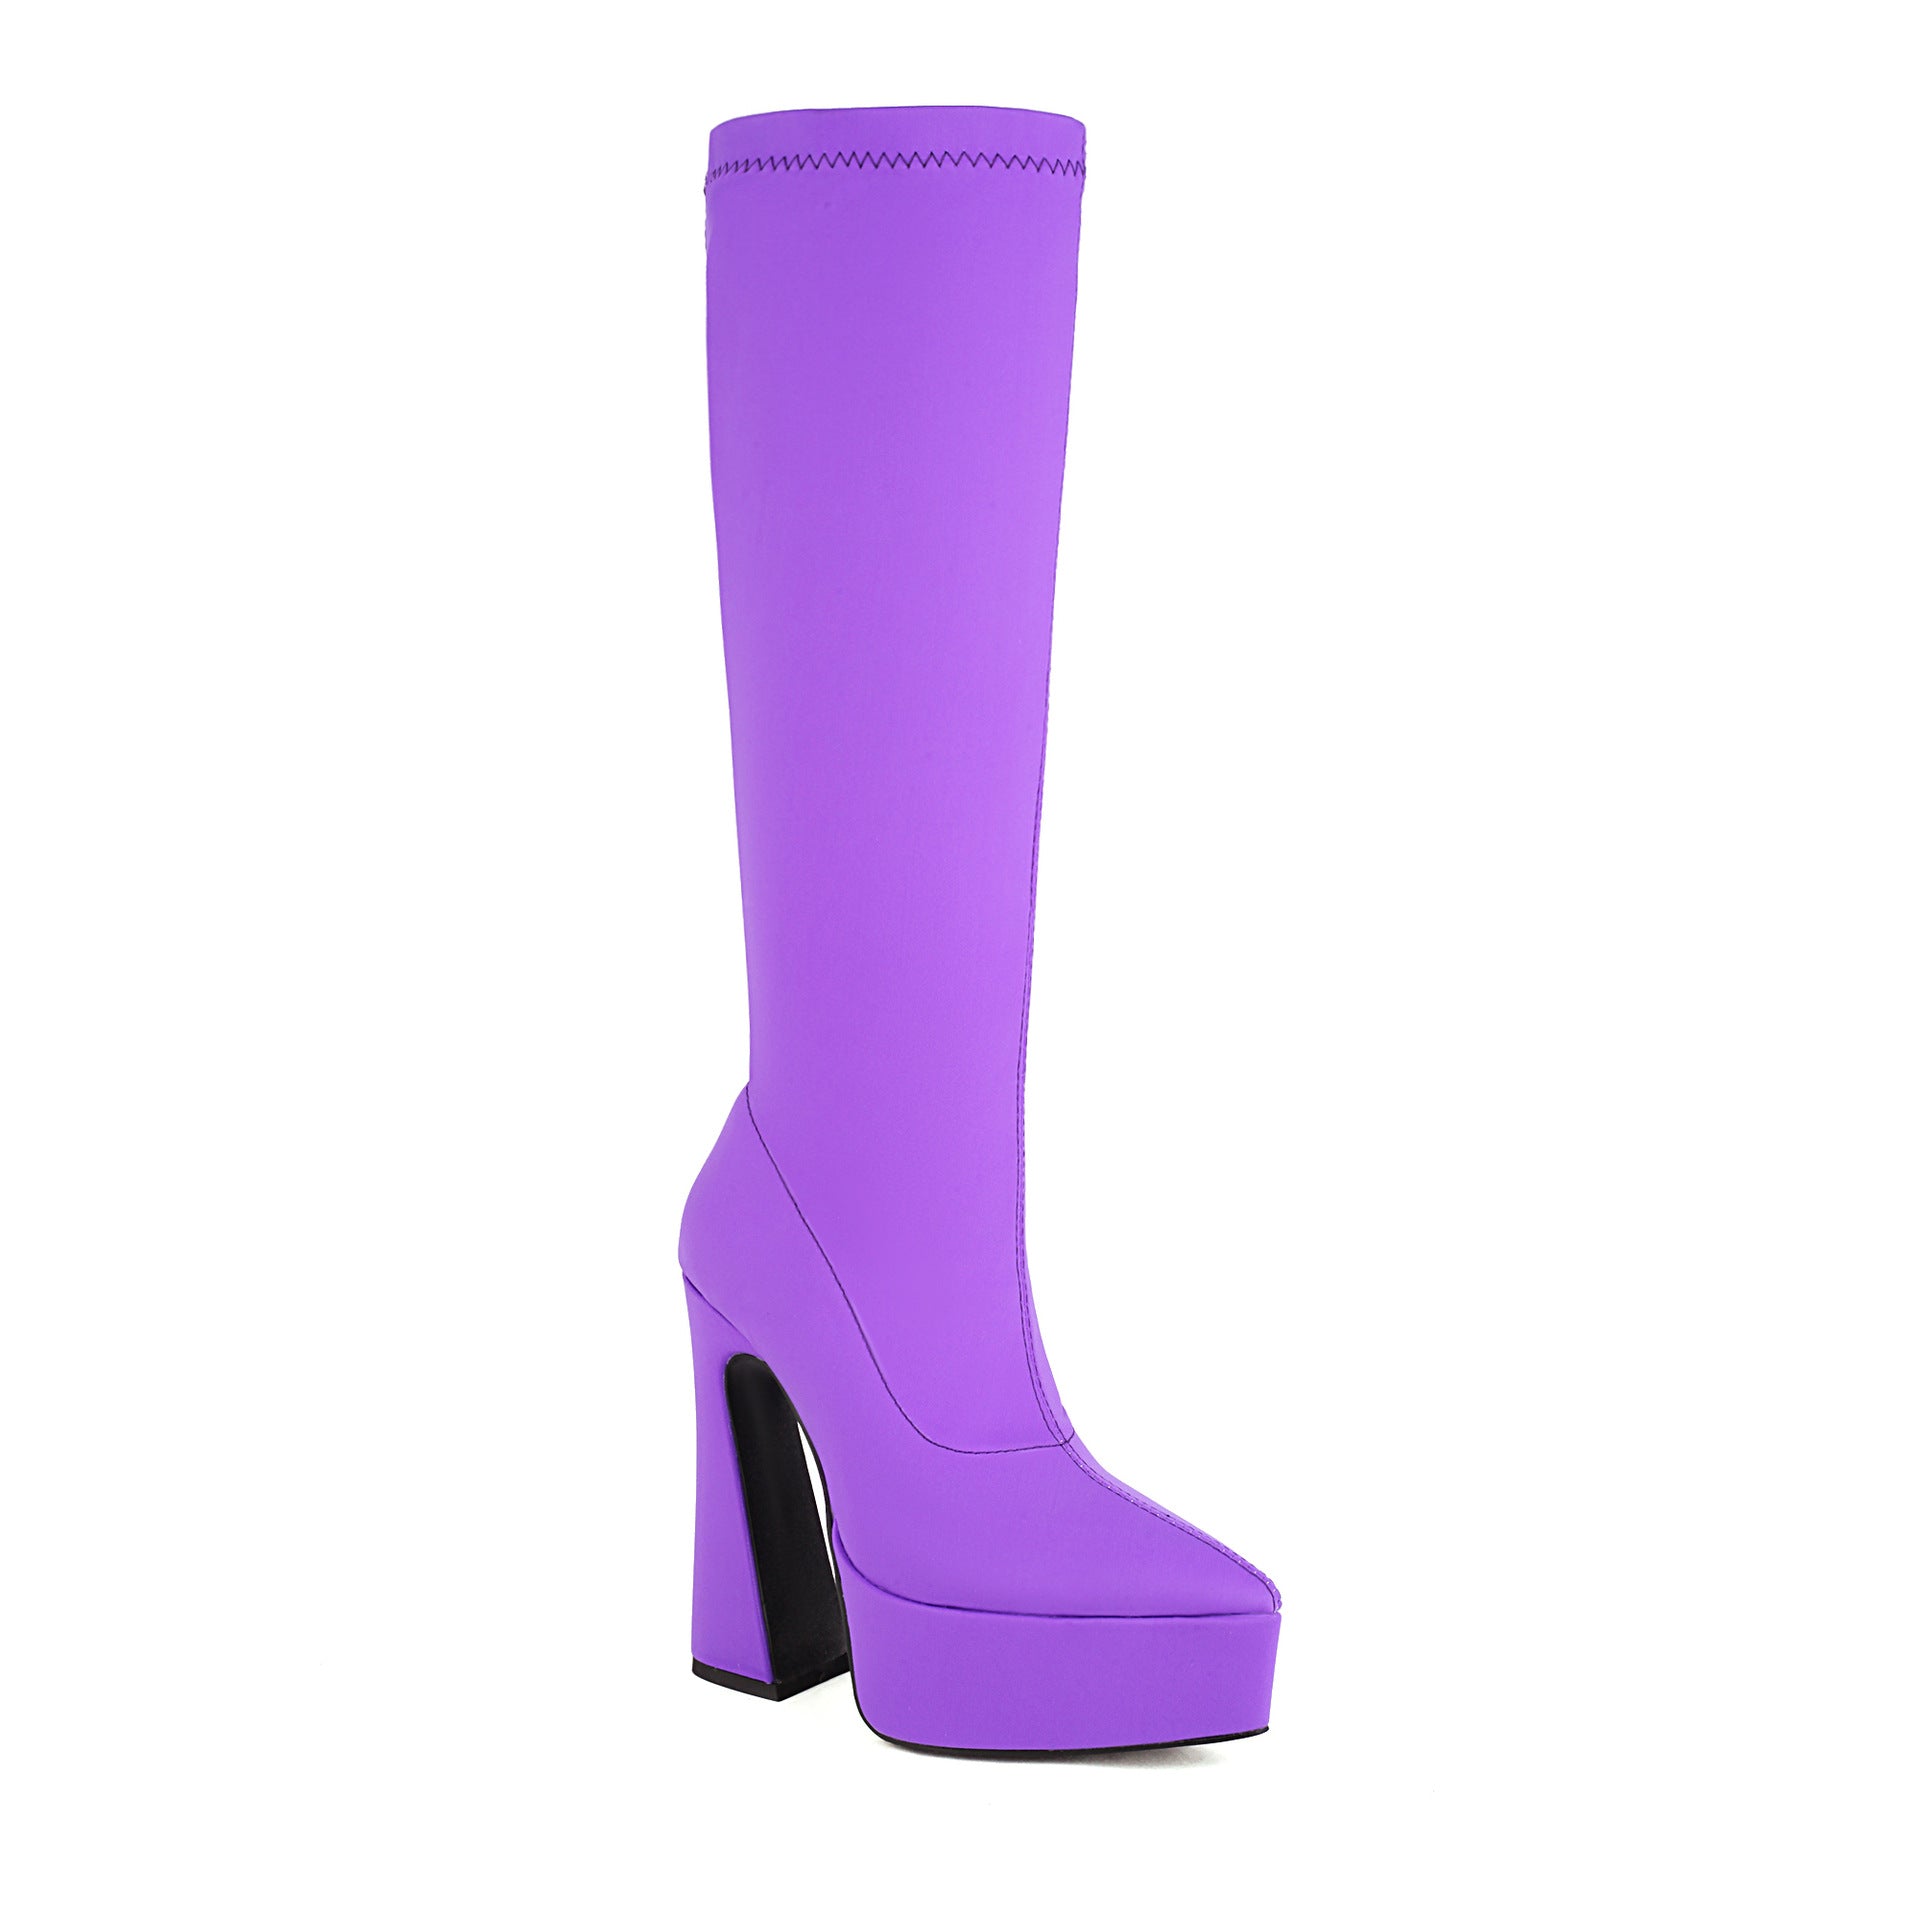 Candy Pointed Toe Super High Heel Boots